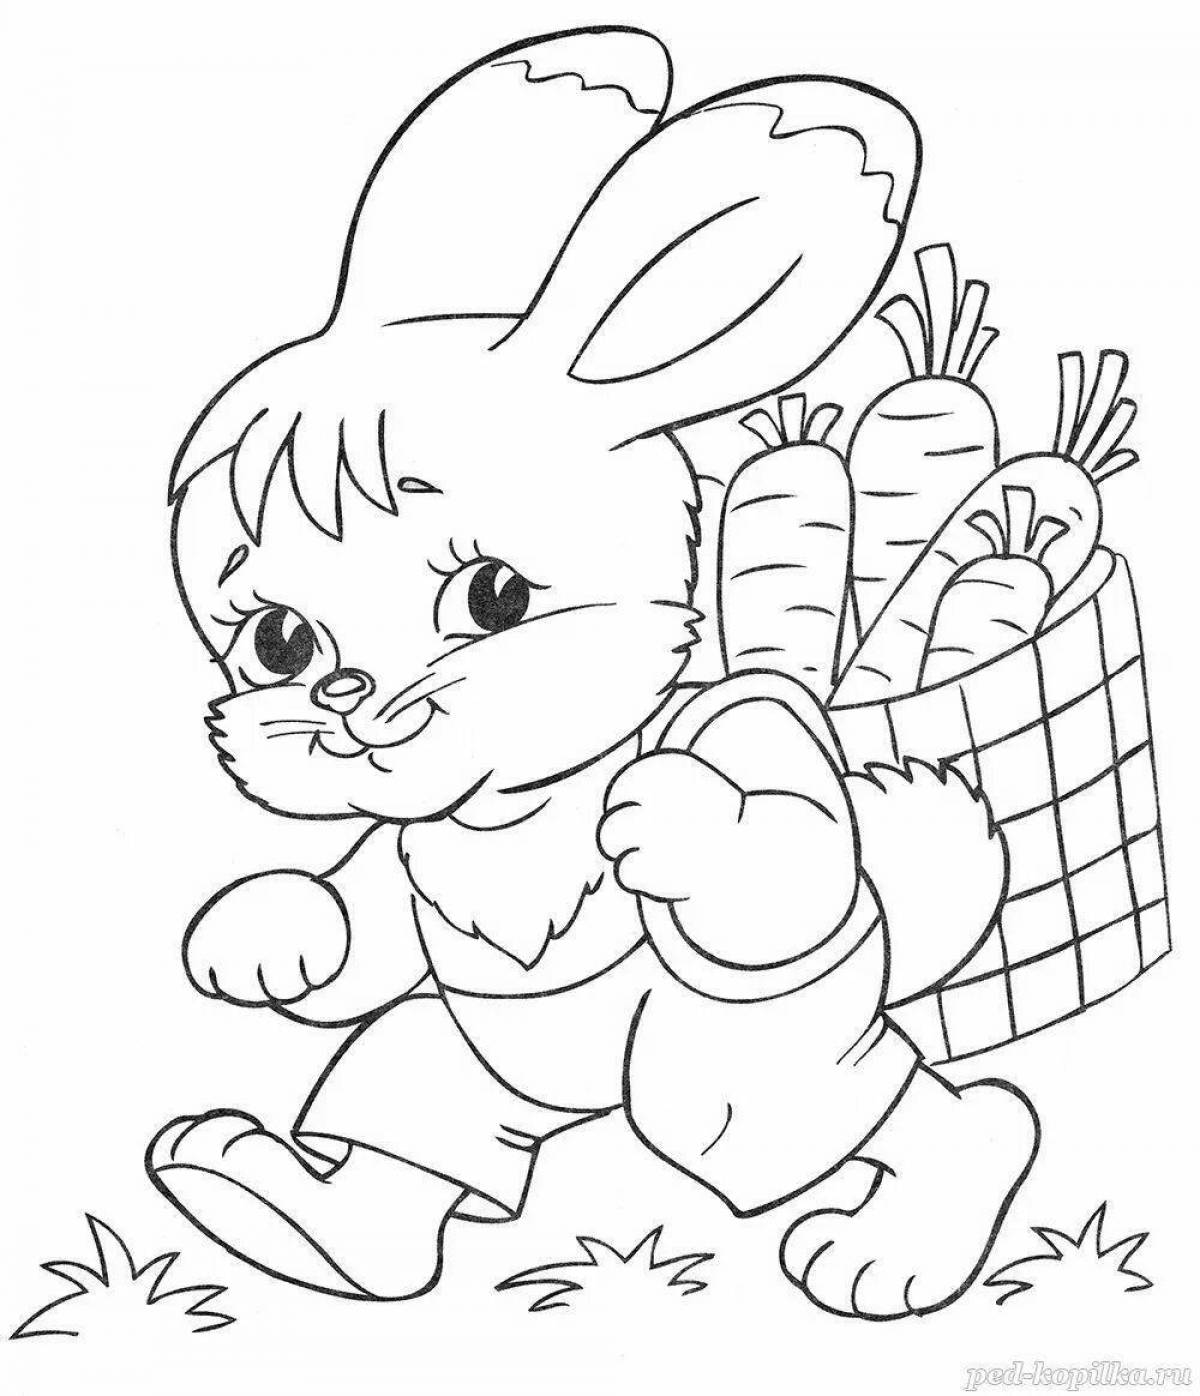 Coloring page cheerful rabbit on the bench